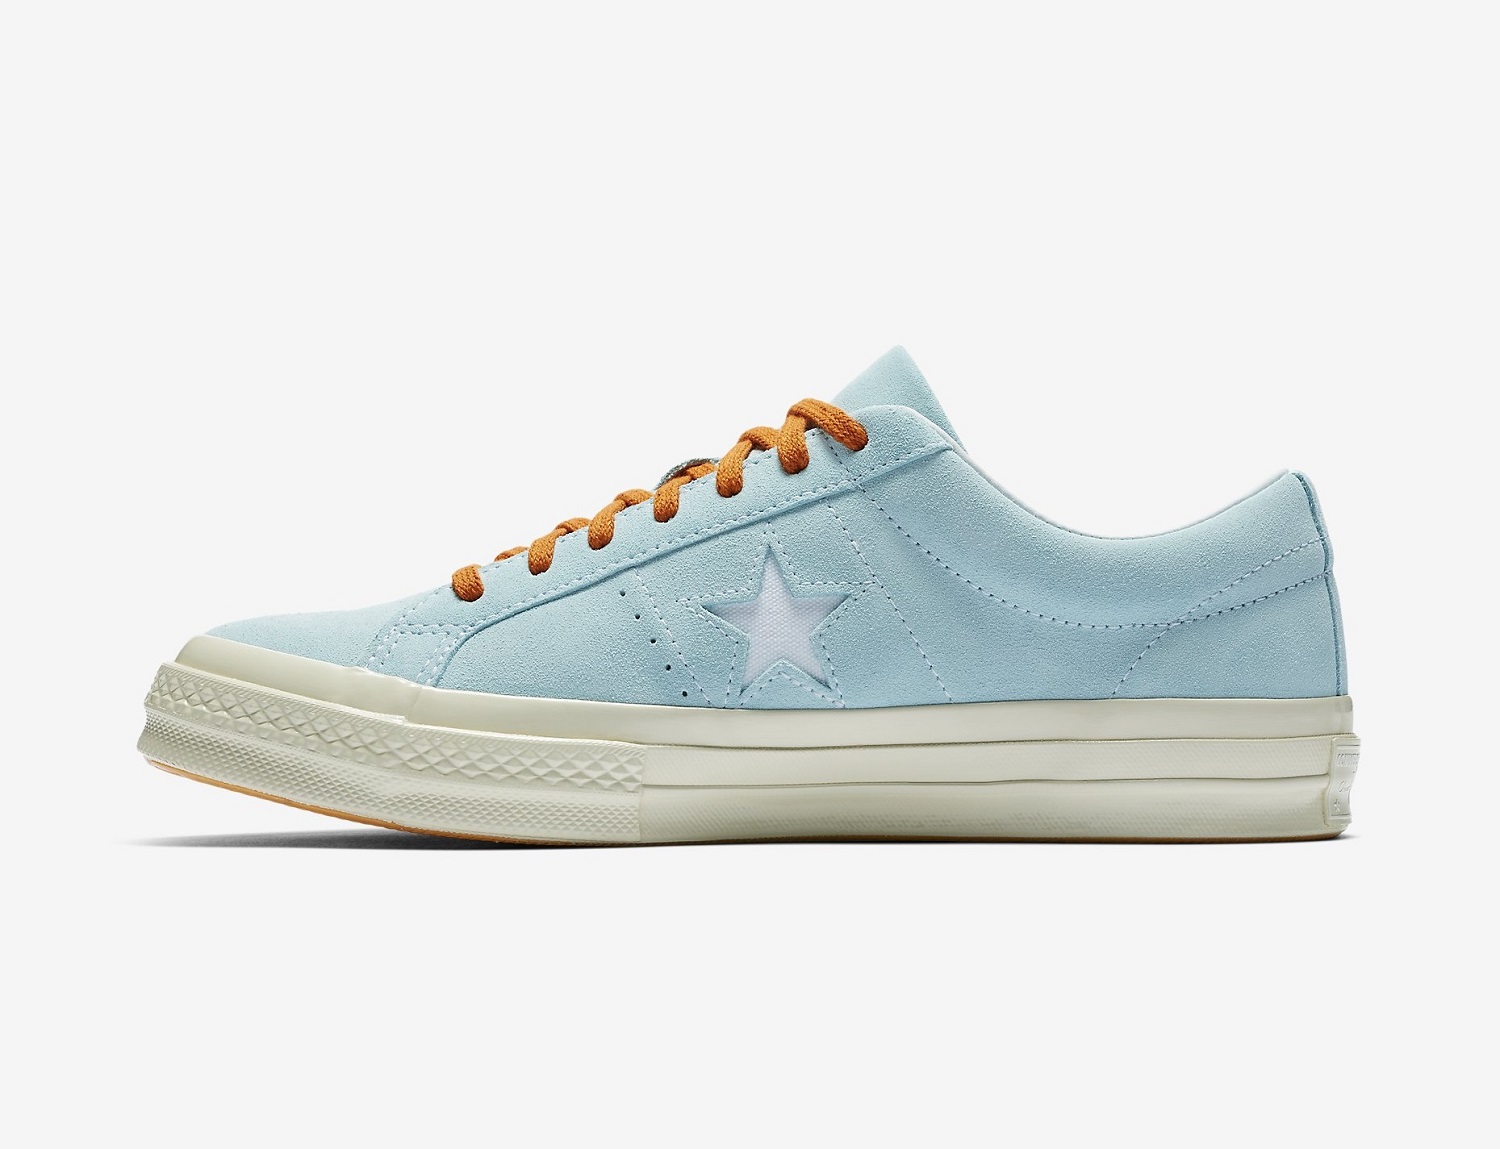 Converse Taps Tyler The Creator For One Star Sneaker and Campaign